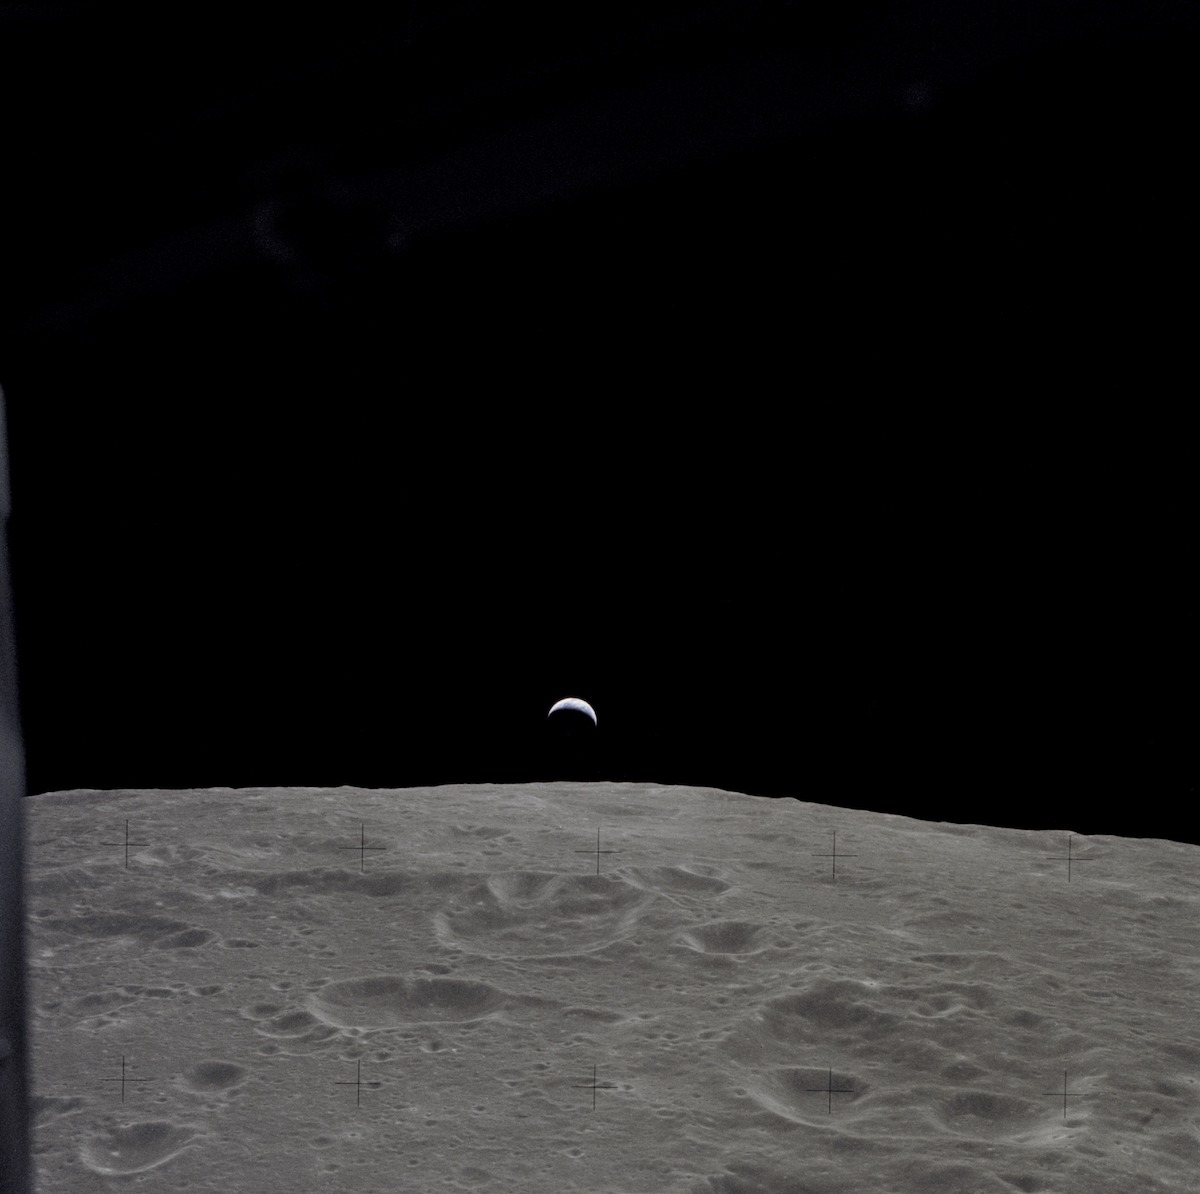 crescent Earth seen in the far distance over the lunar horizon